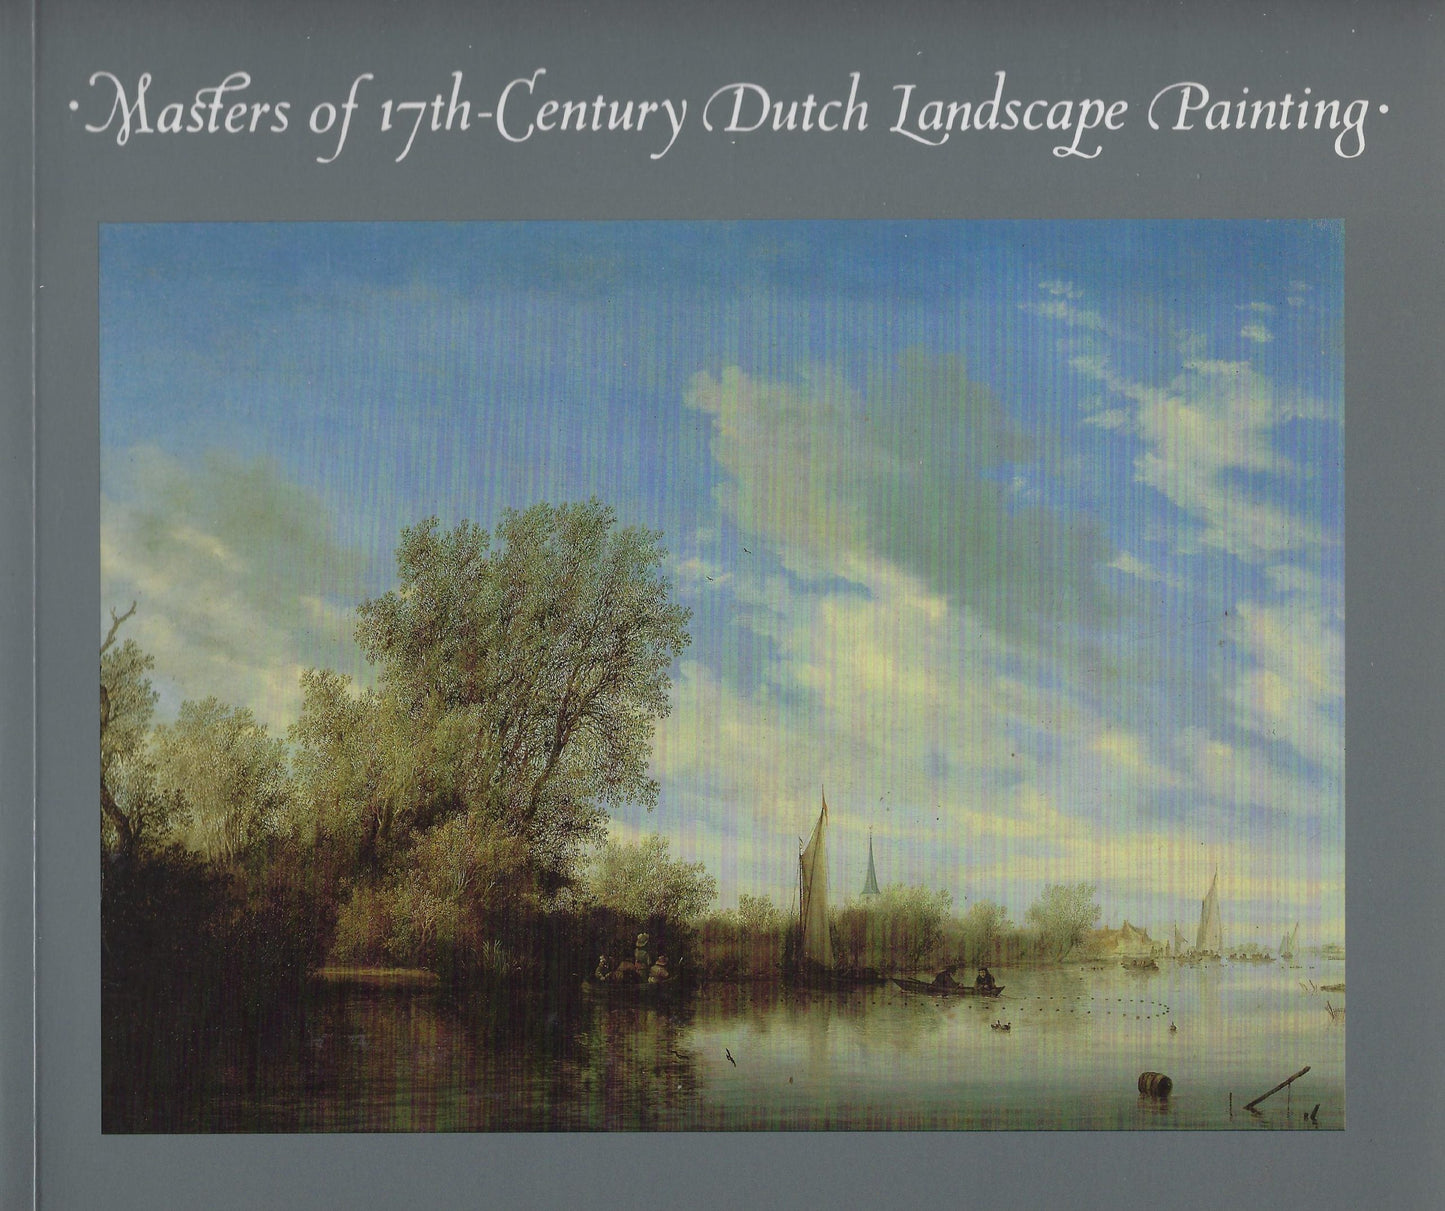 Masters of 17th-Century Dutch landscape painting